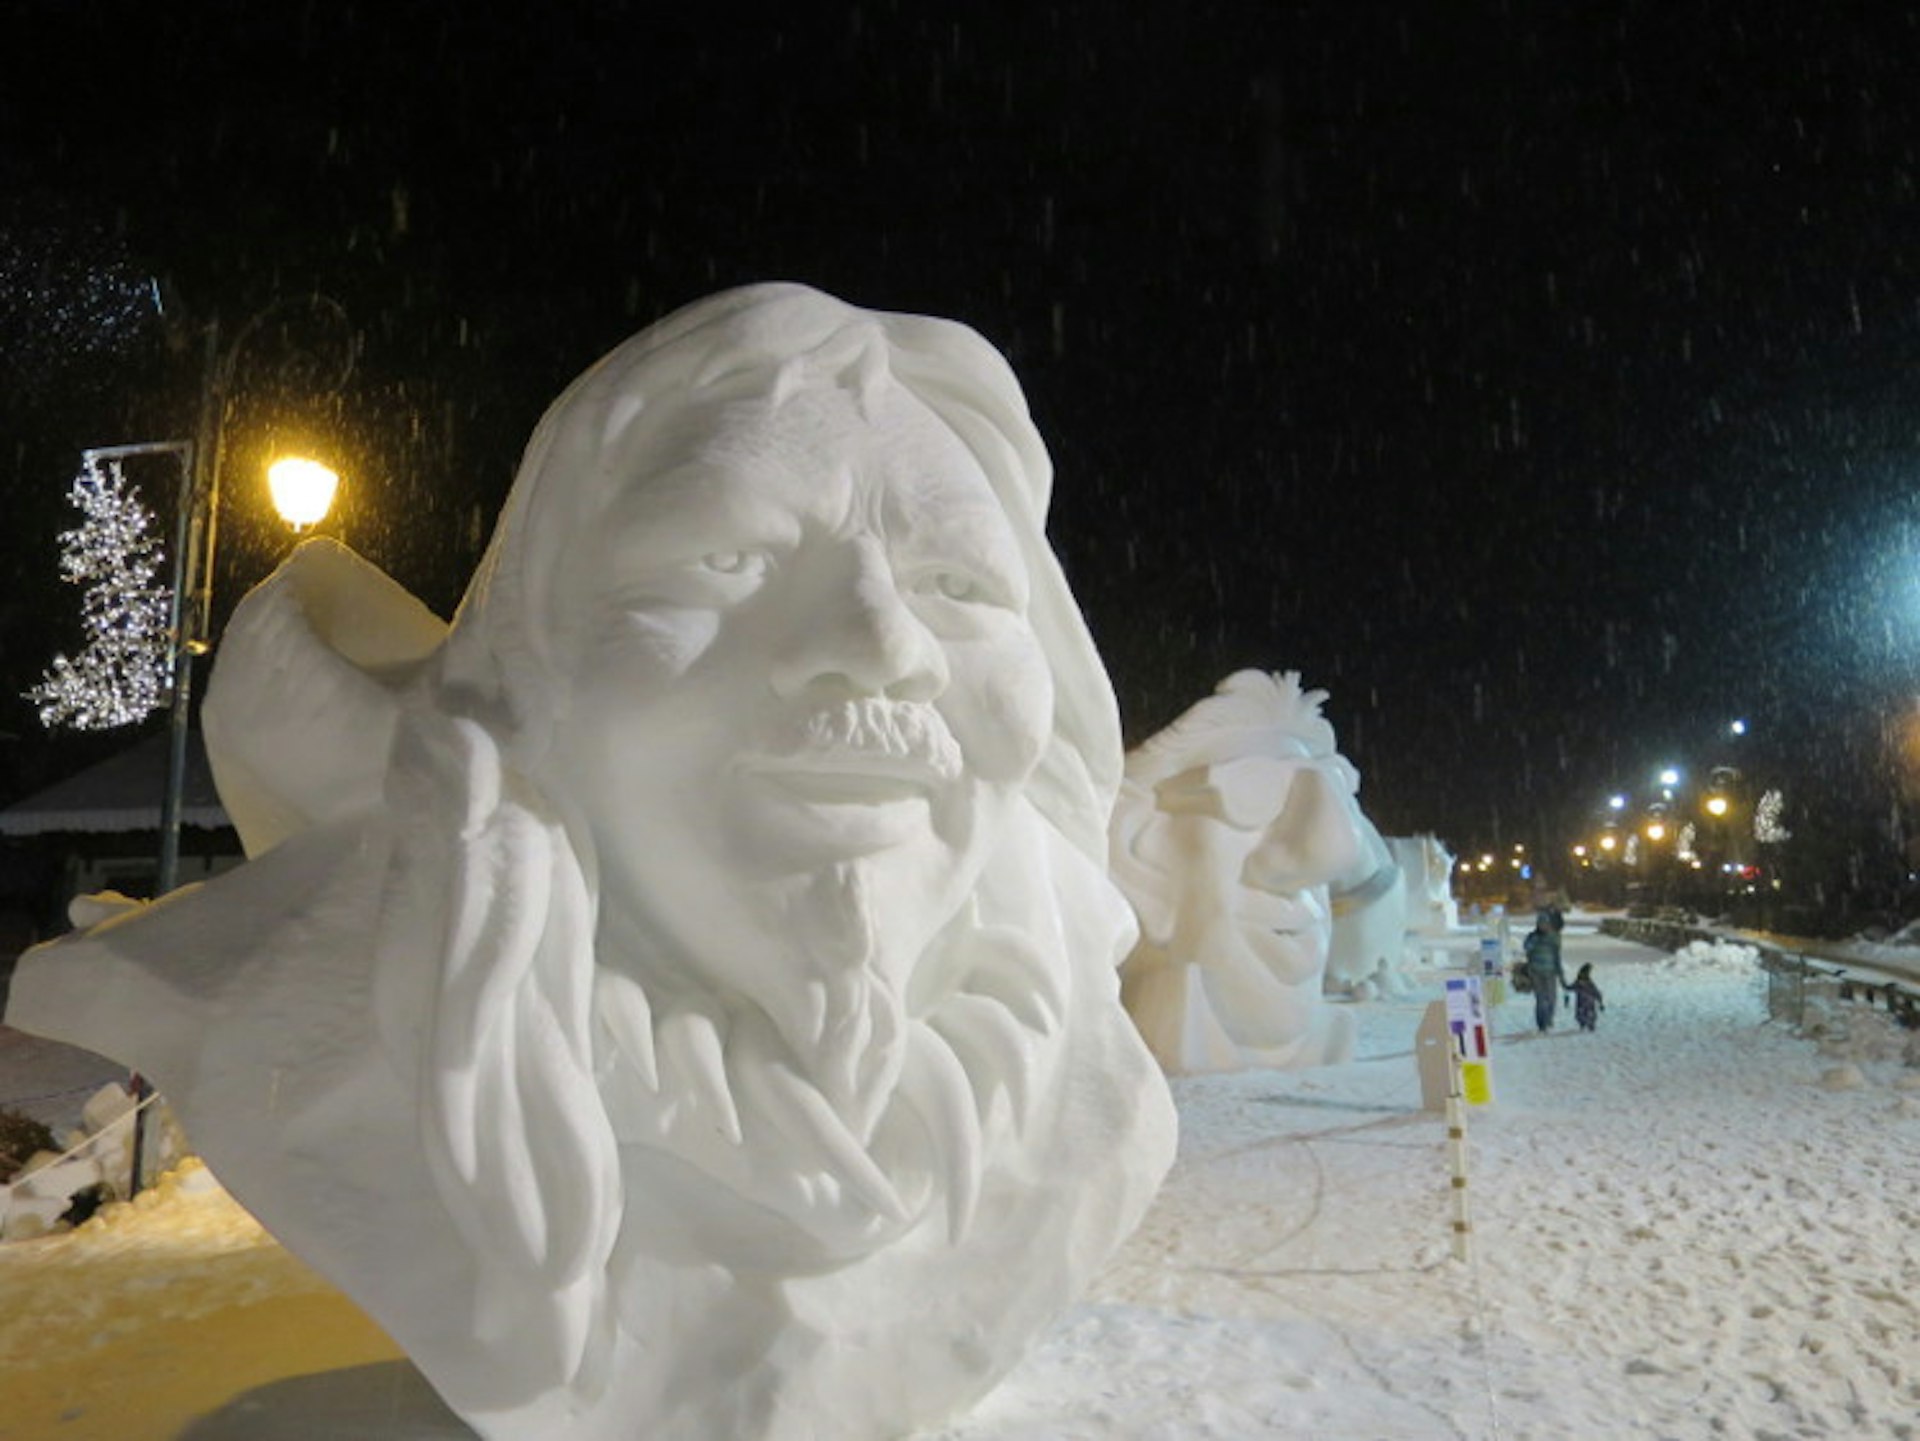 A giant sculpture of a man's head, made out of ice, sits in the snowy main street of the village of Valloire, France.